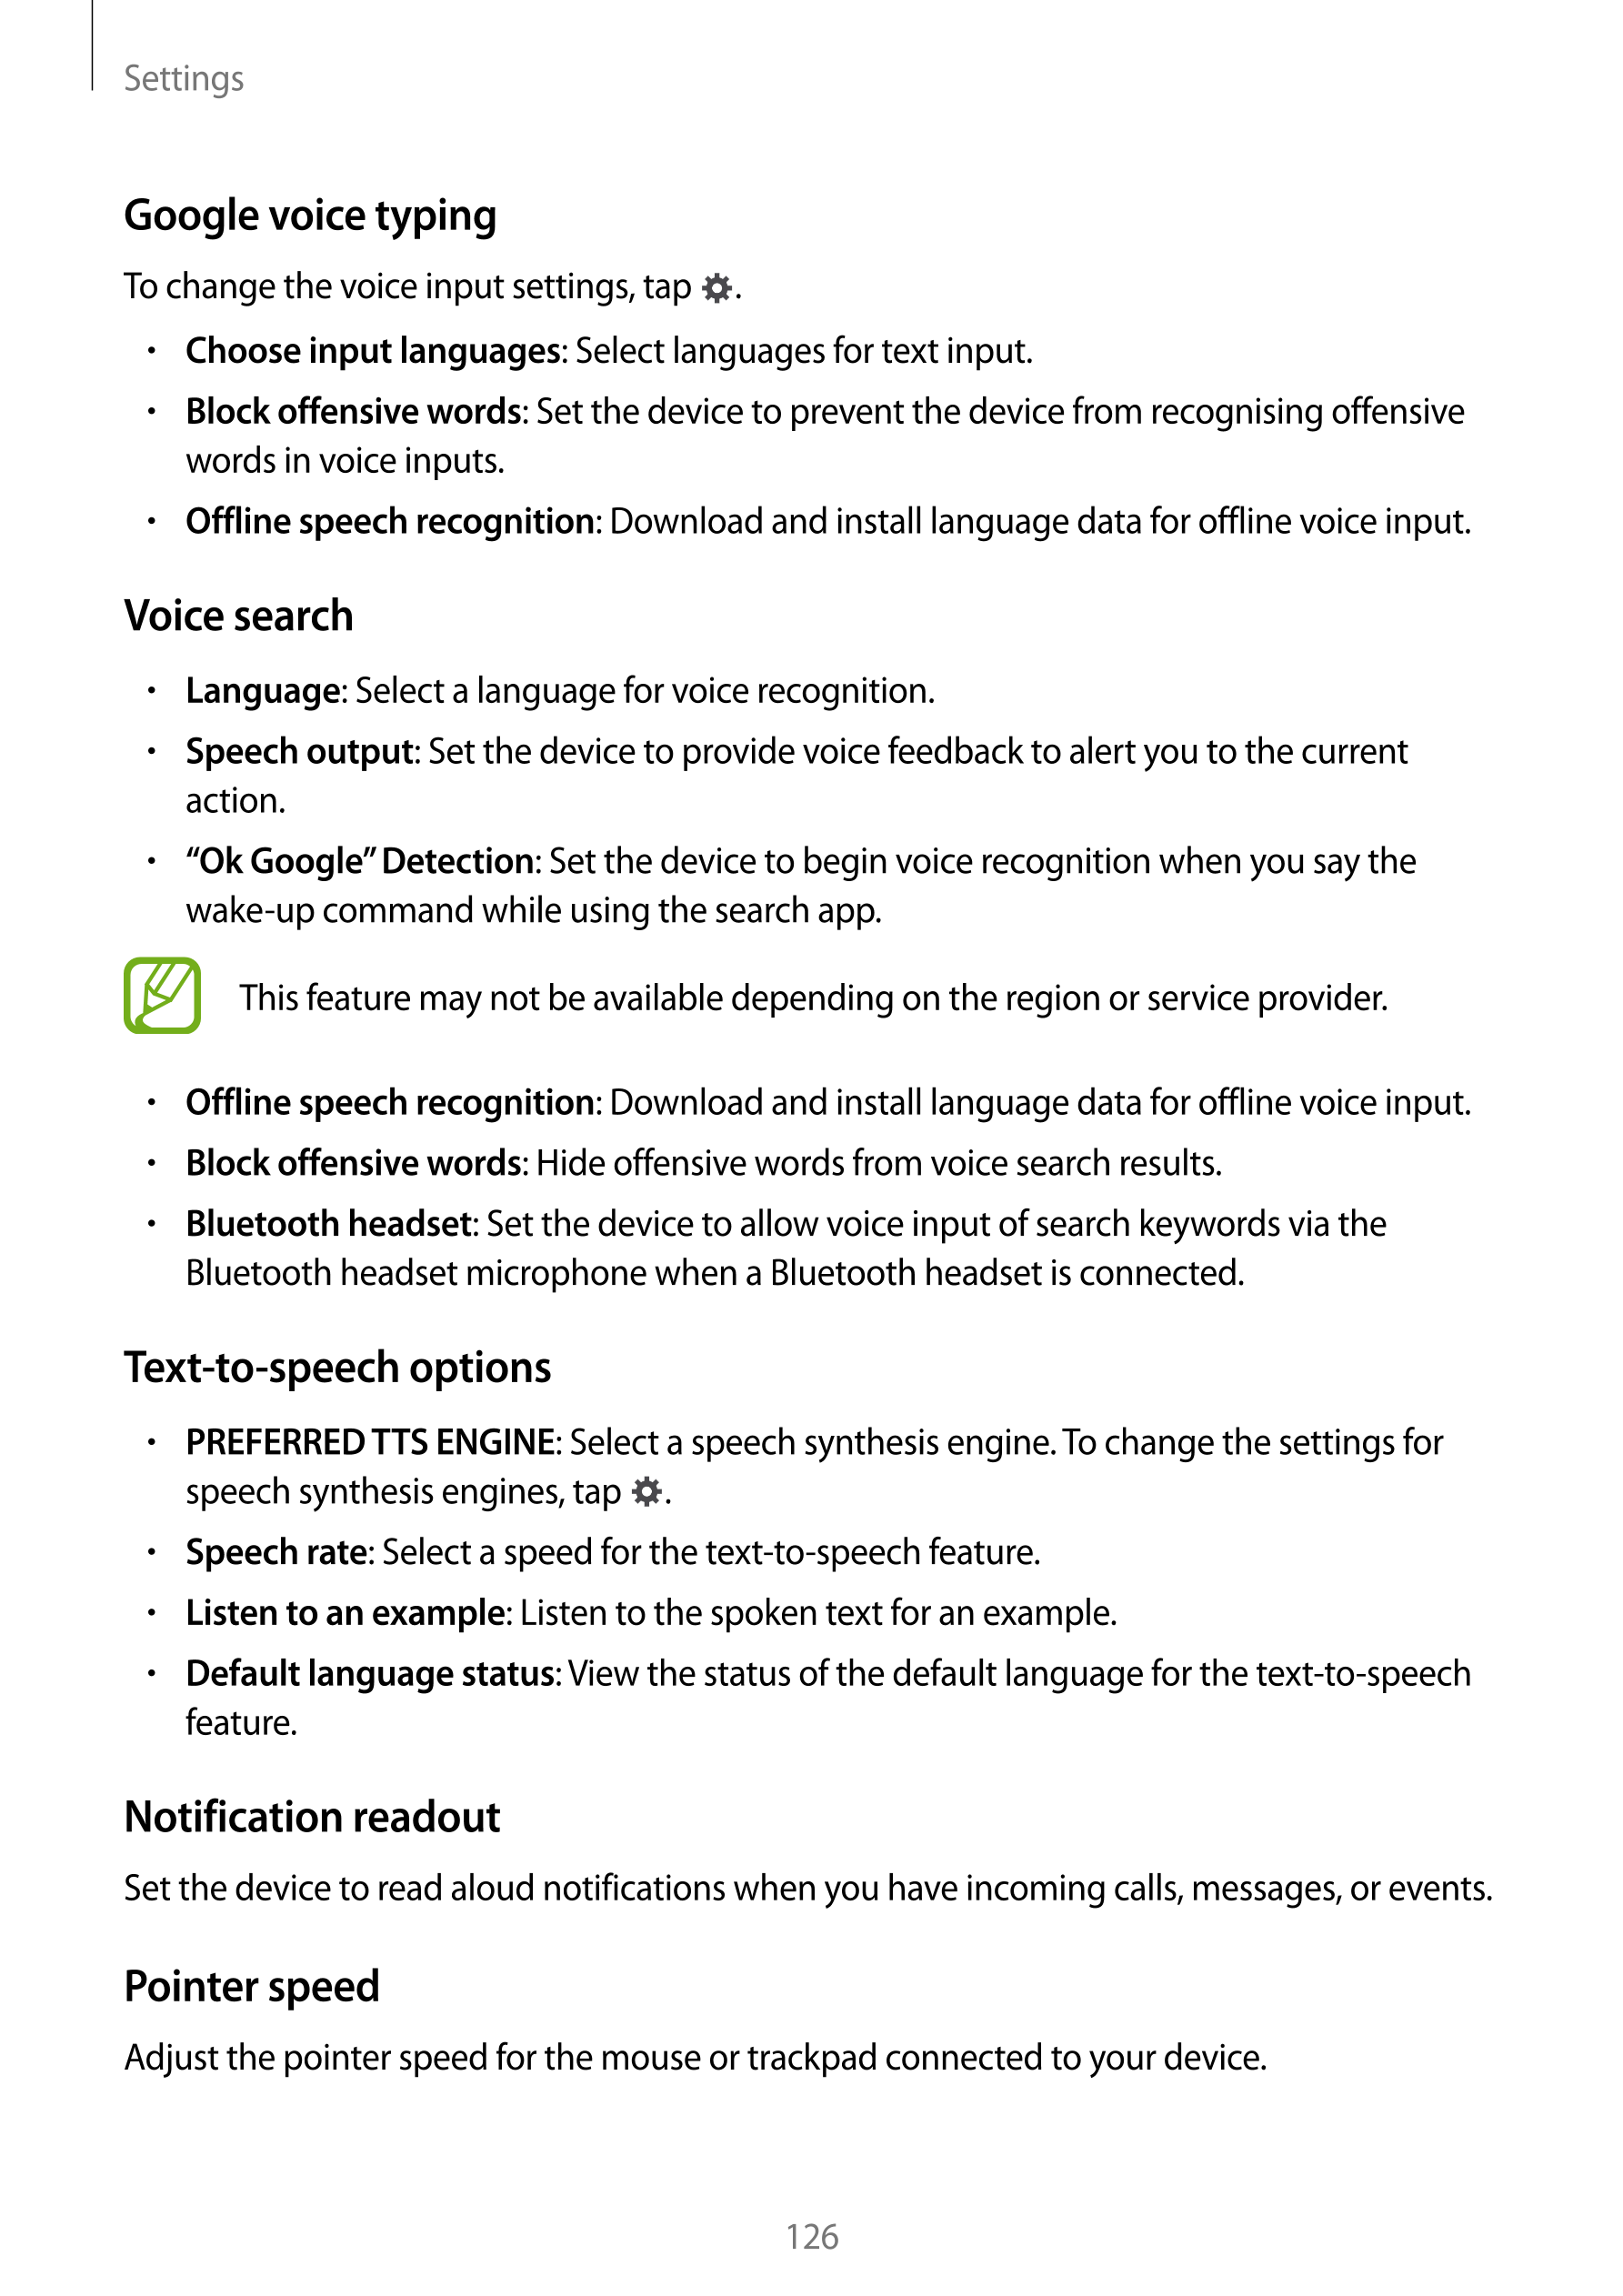 Settings
Google voice typing
To change the voice input settings, tap  .
•     : Select languages for text input.Choose input lan